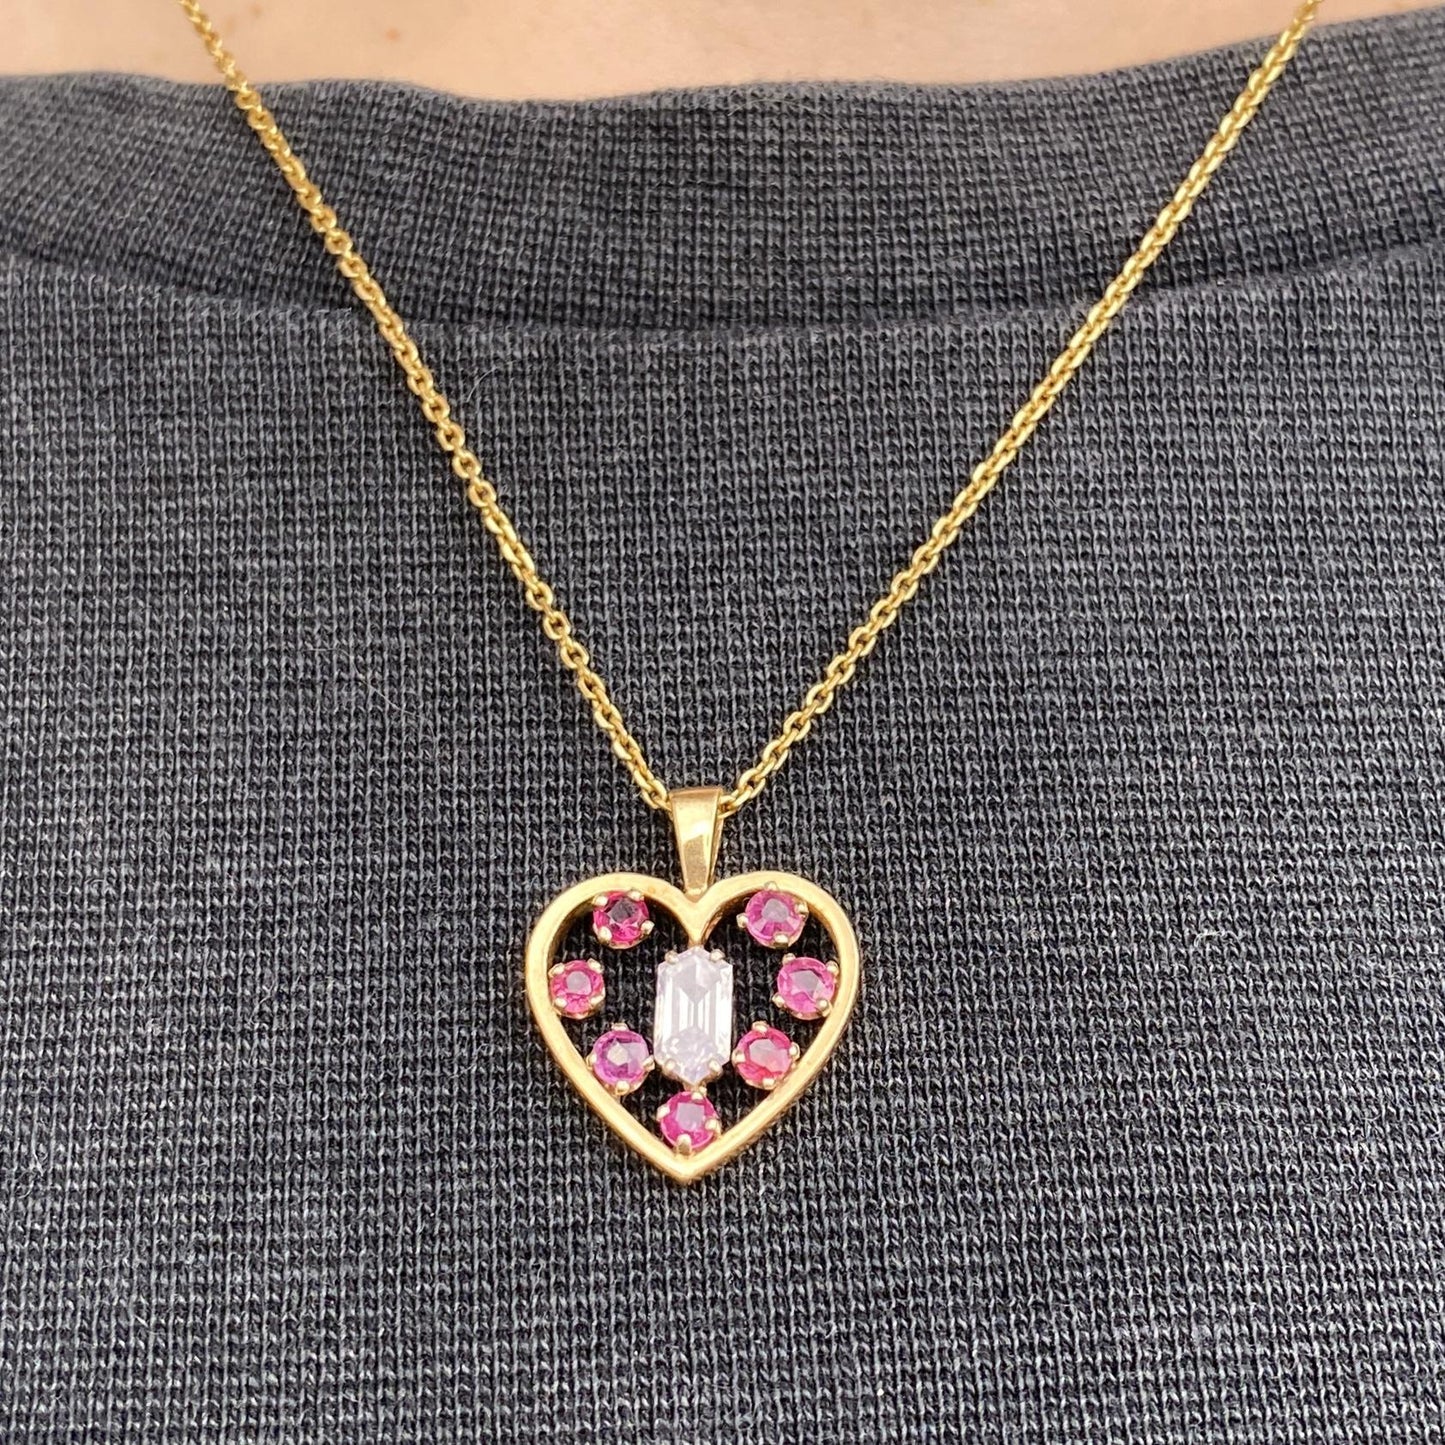 0.60ctw Heart Necklace Diamond & Ruby 14K Yellow Gold 4.0G